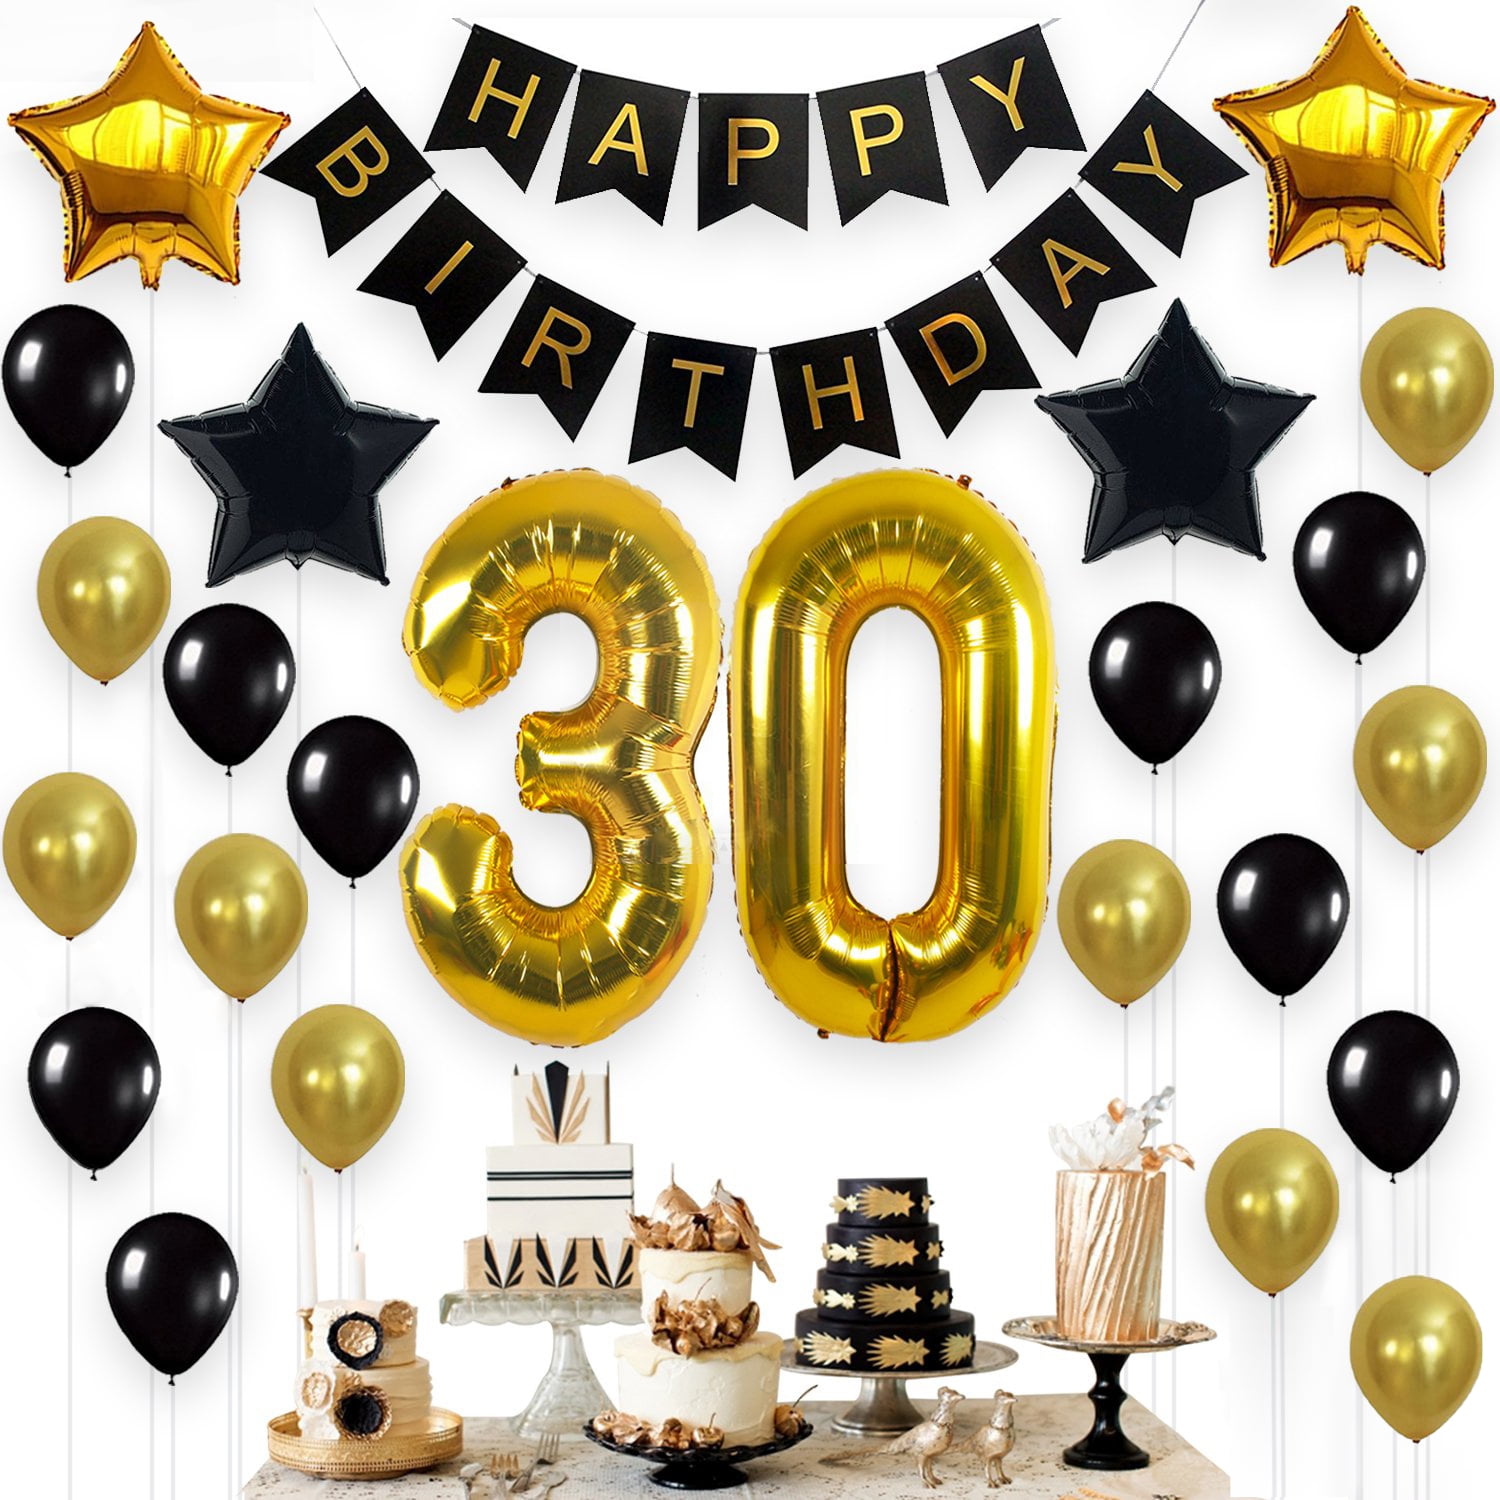 30th Happy Birthday Banner Kits Pink Balloons Decoration for Girls Women 30th Birthday Party Supplies 30th Birthday Decorations for Her Pink 30 Birthday Party Decoration for Her 30